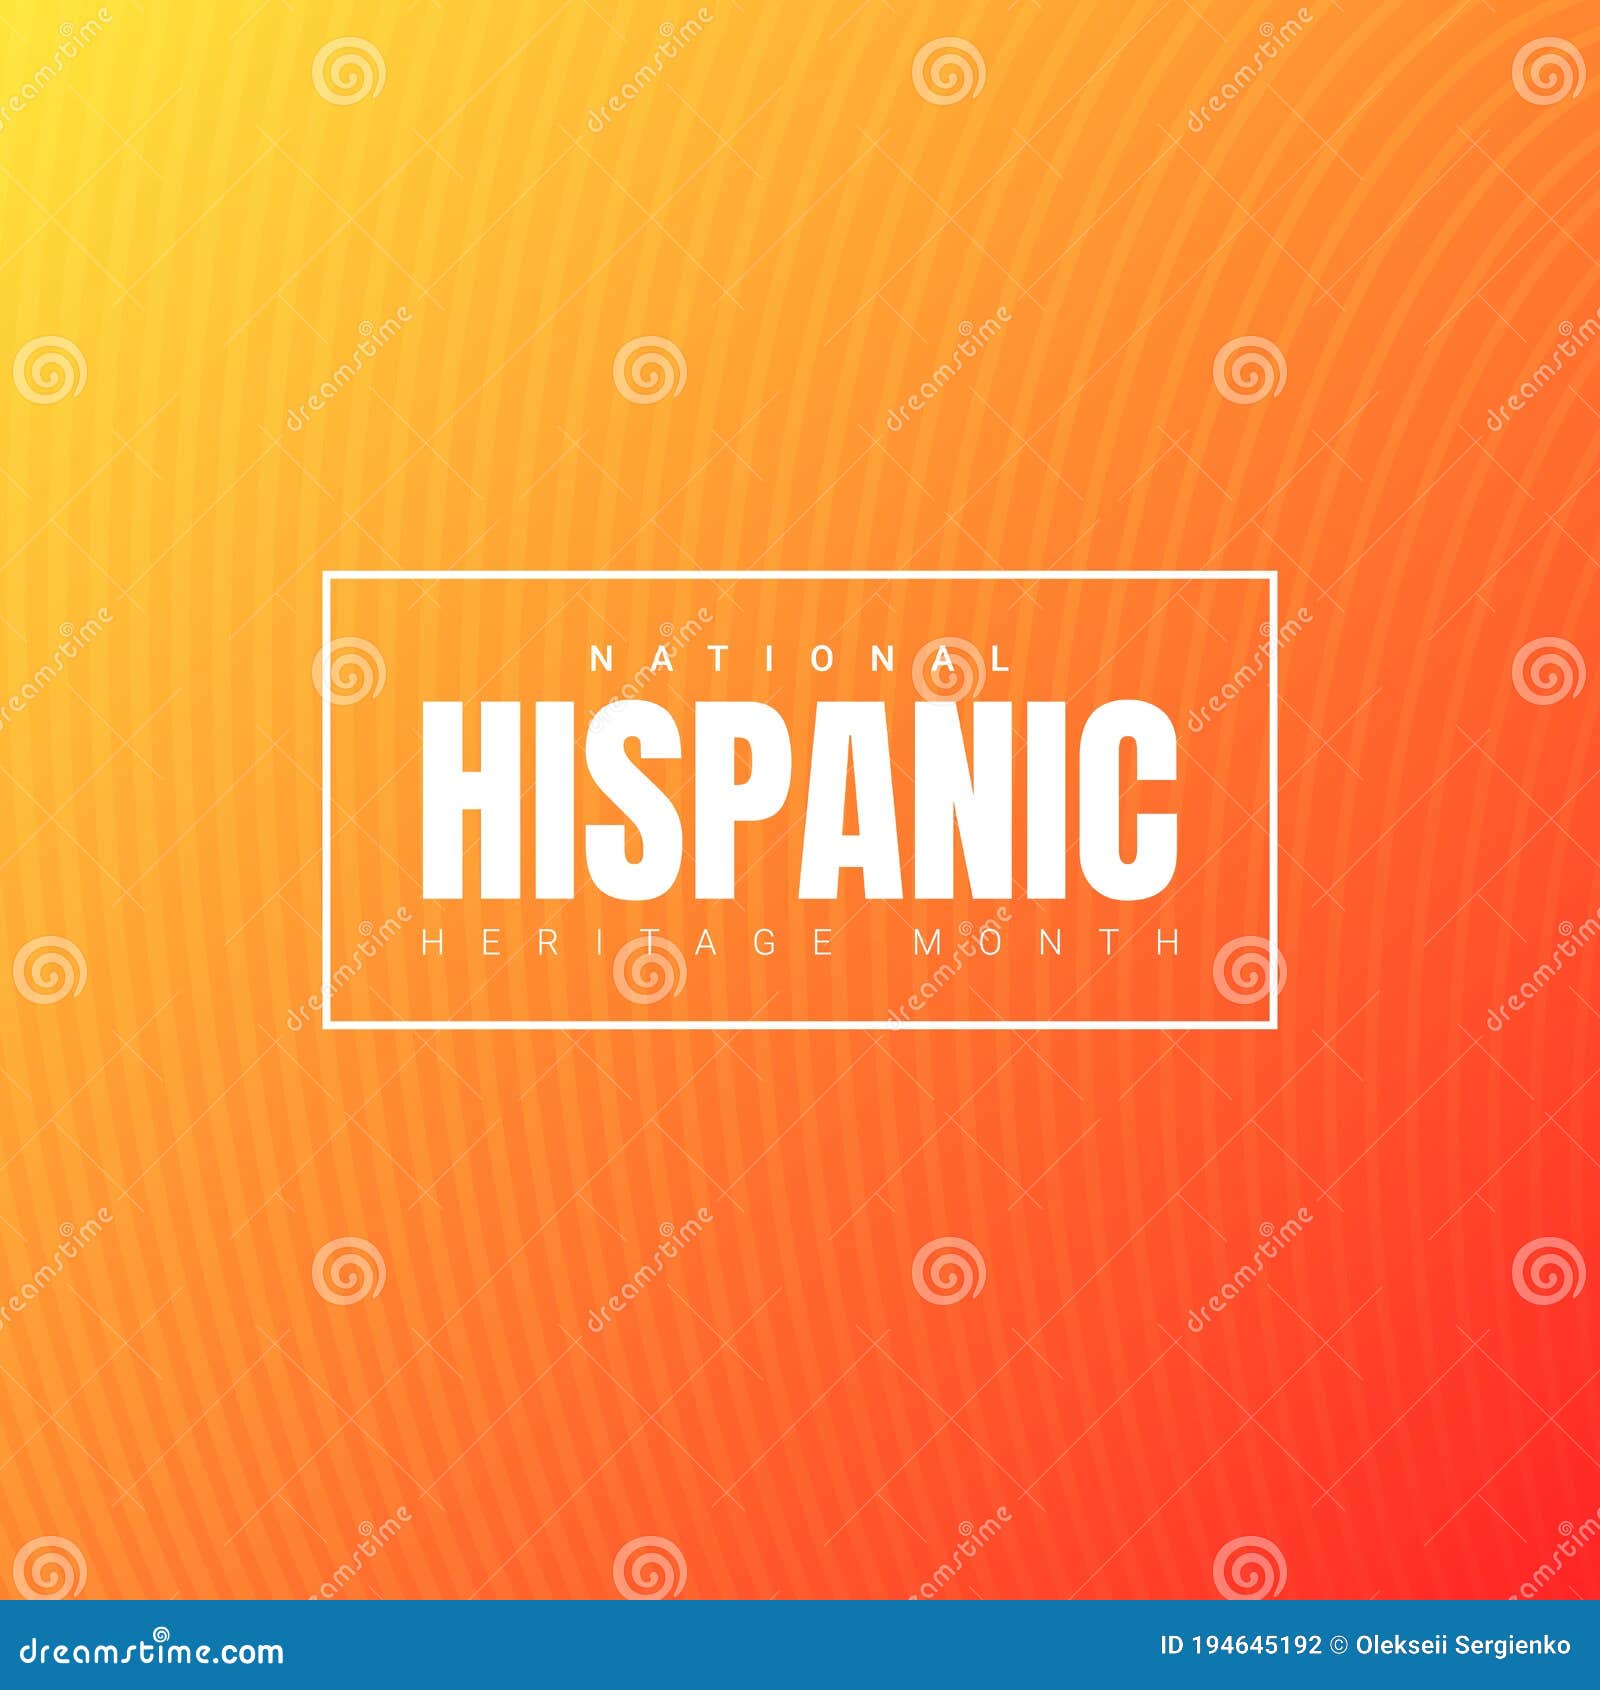 national hispanic heritage month square banner template with white text in a frame on orange gradient background